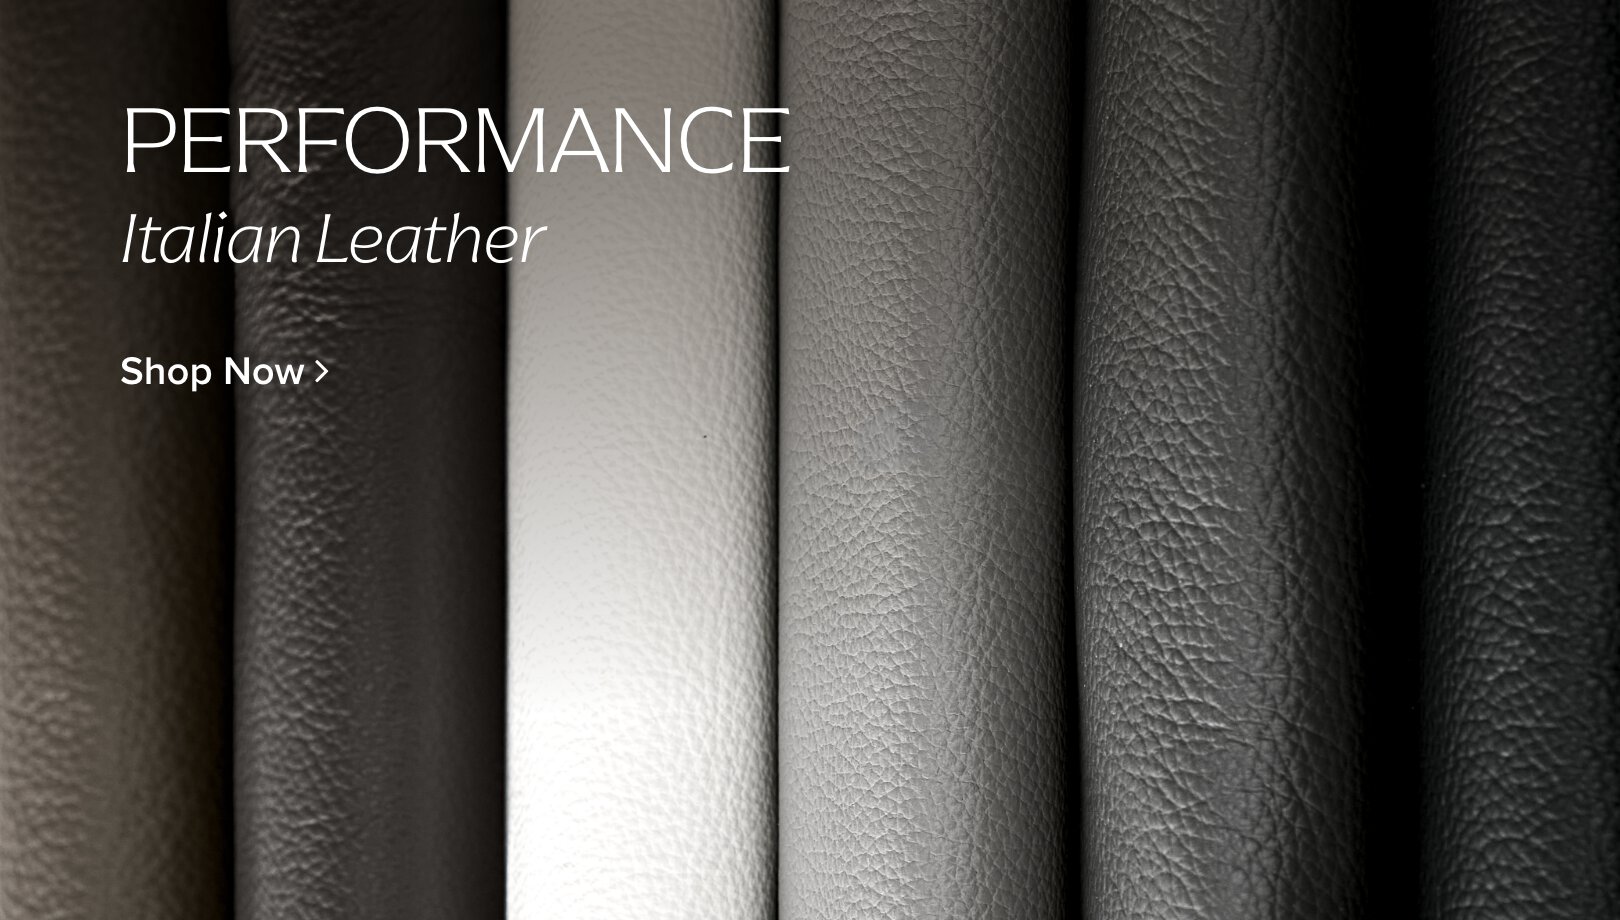 Performance Italian Leather Shop Now>